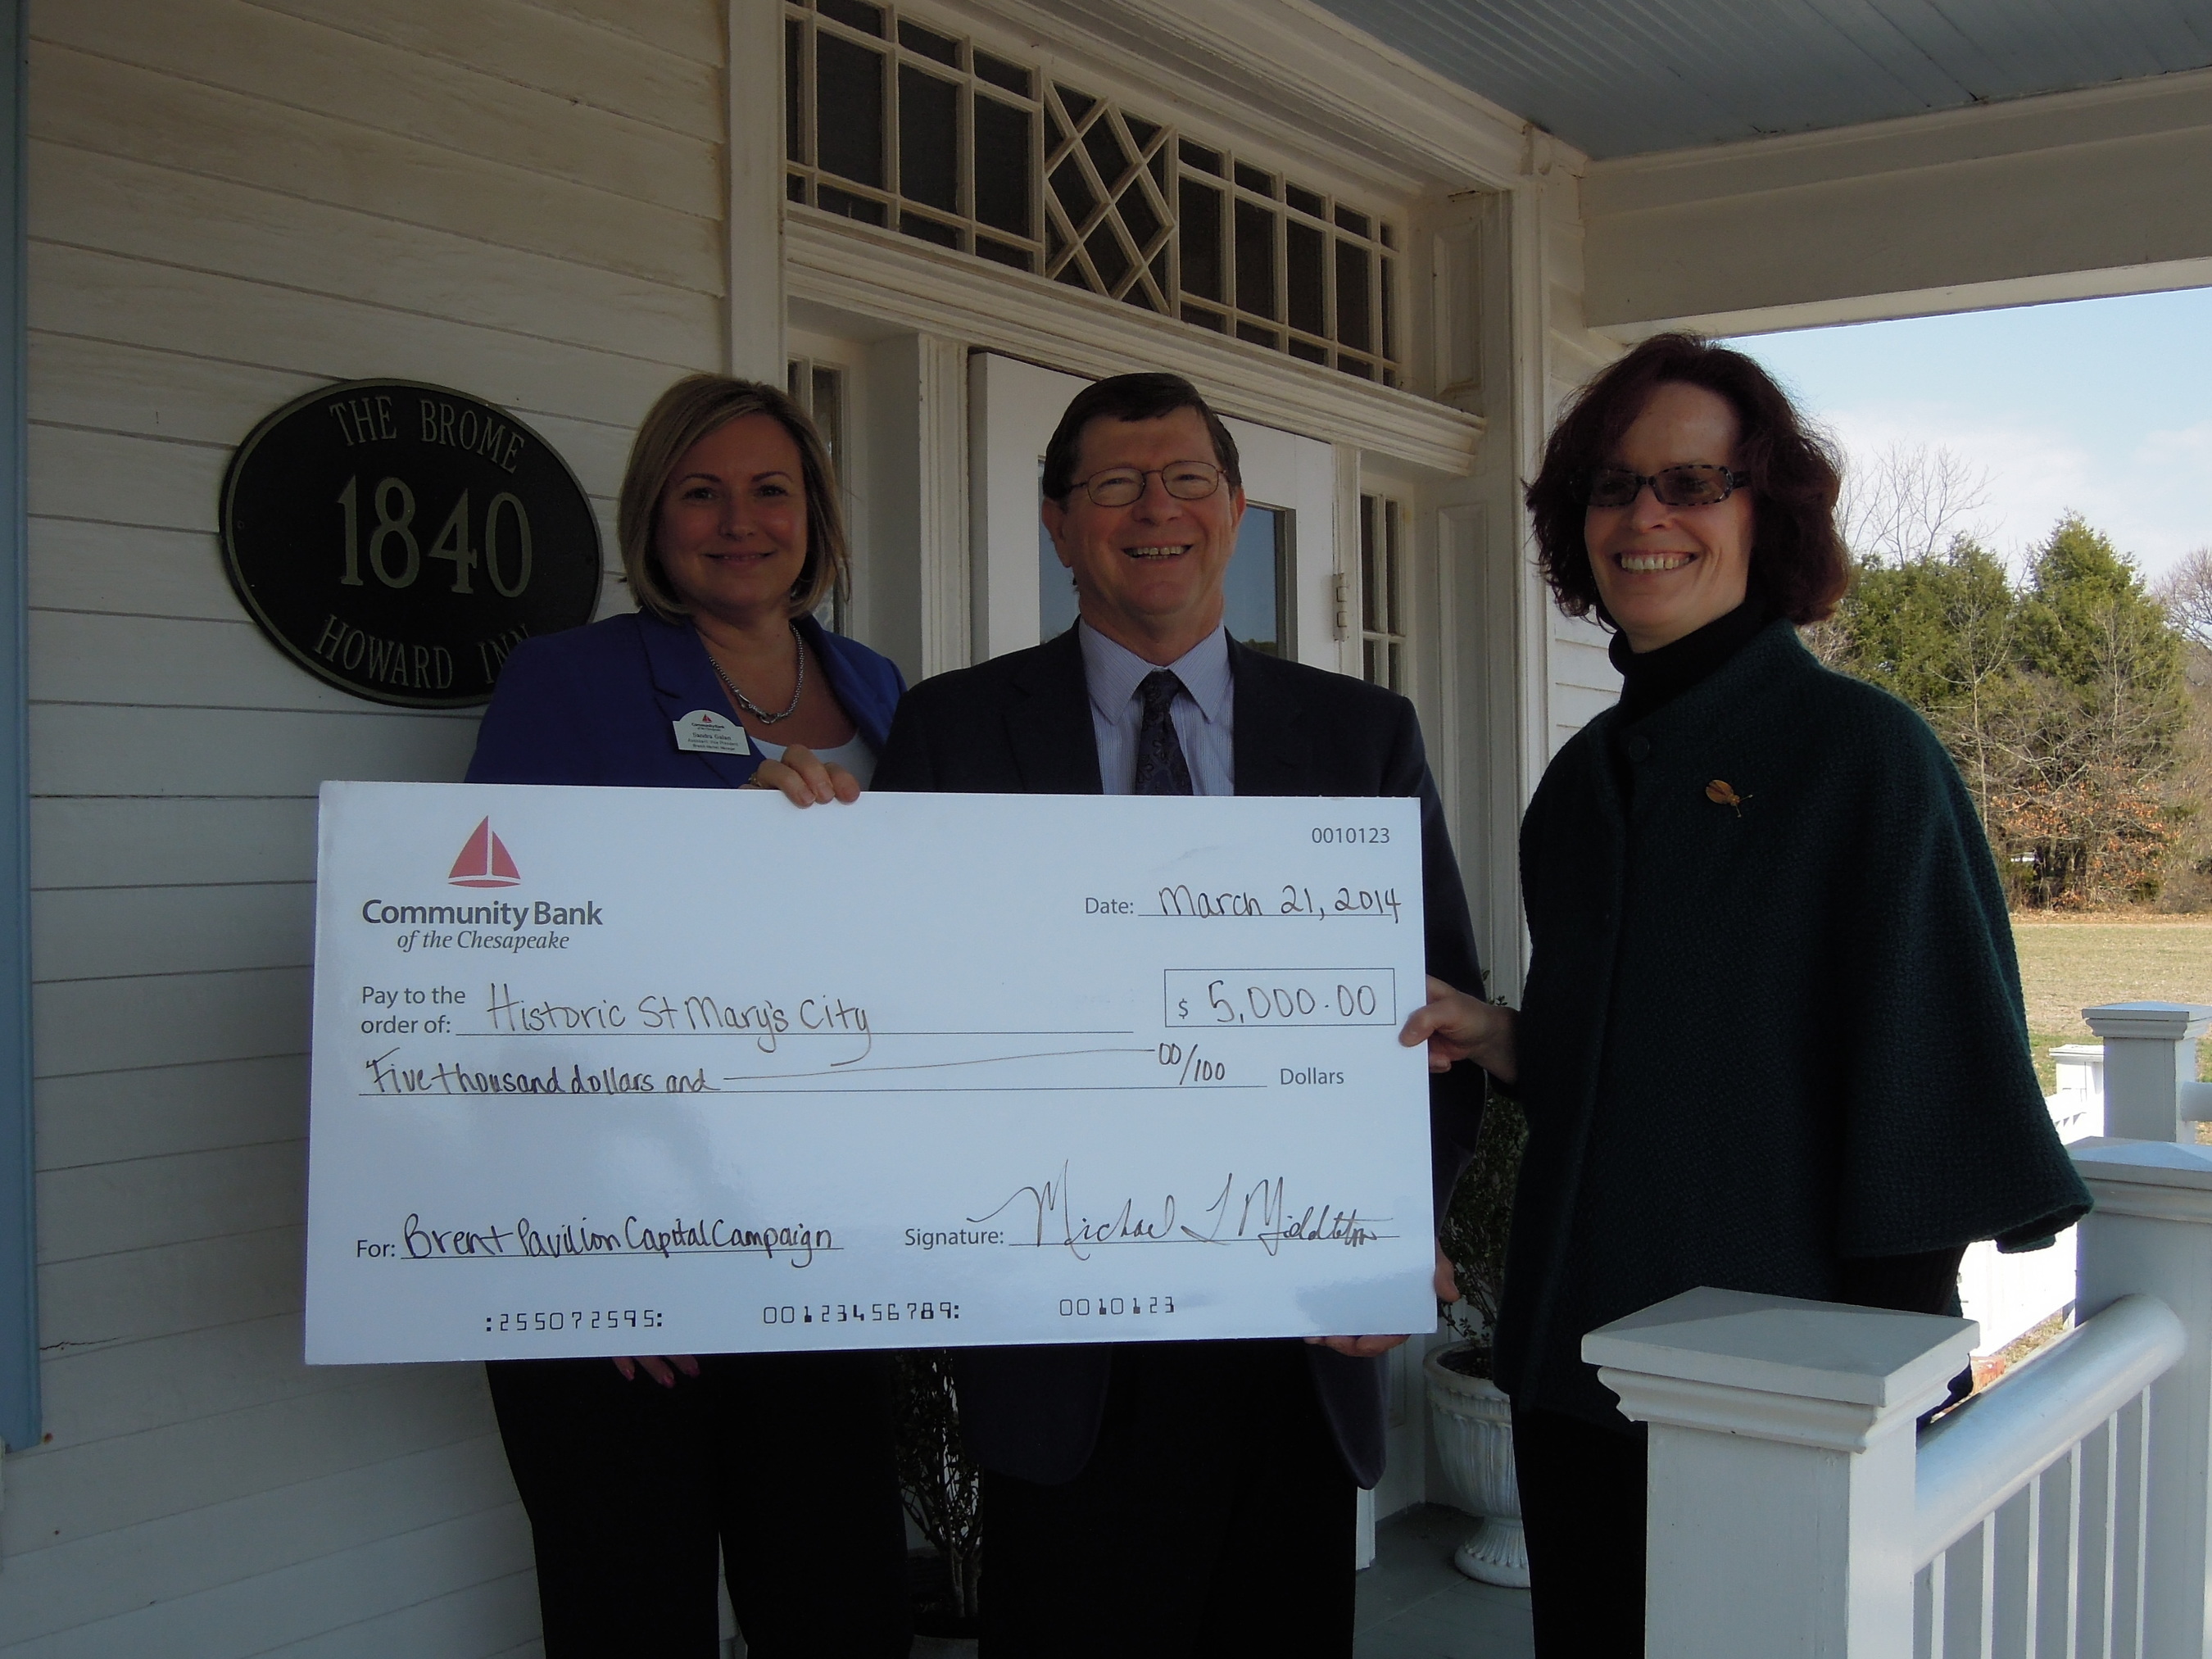 From left to right: Community Bank representatives Sandy Galan, Branch Market Manager, St. Mary's County and Michael Middleton, Chief Executive Officer, present donation check to Regina M. Faden, Executive Director of Historic St. Mary's City. (PRNewsFoto/Community Bank of the Chesapeake)